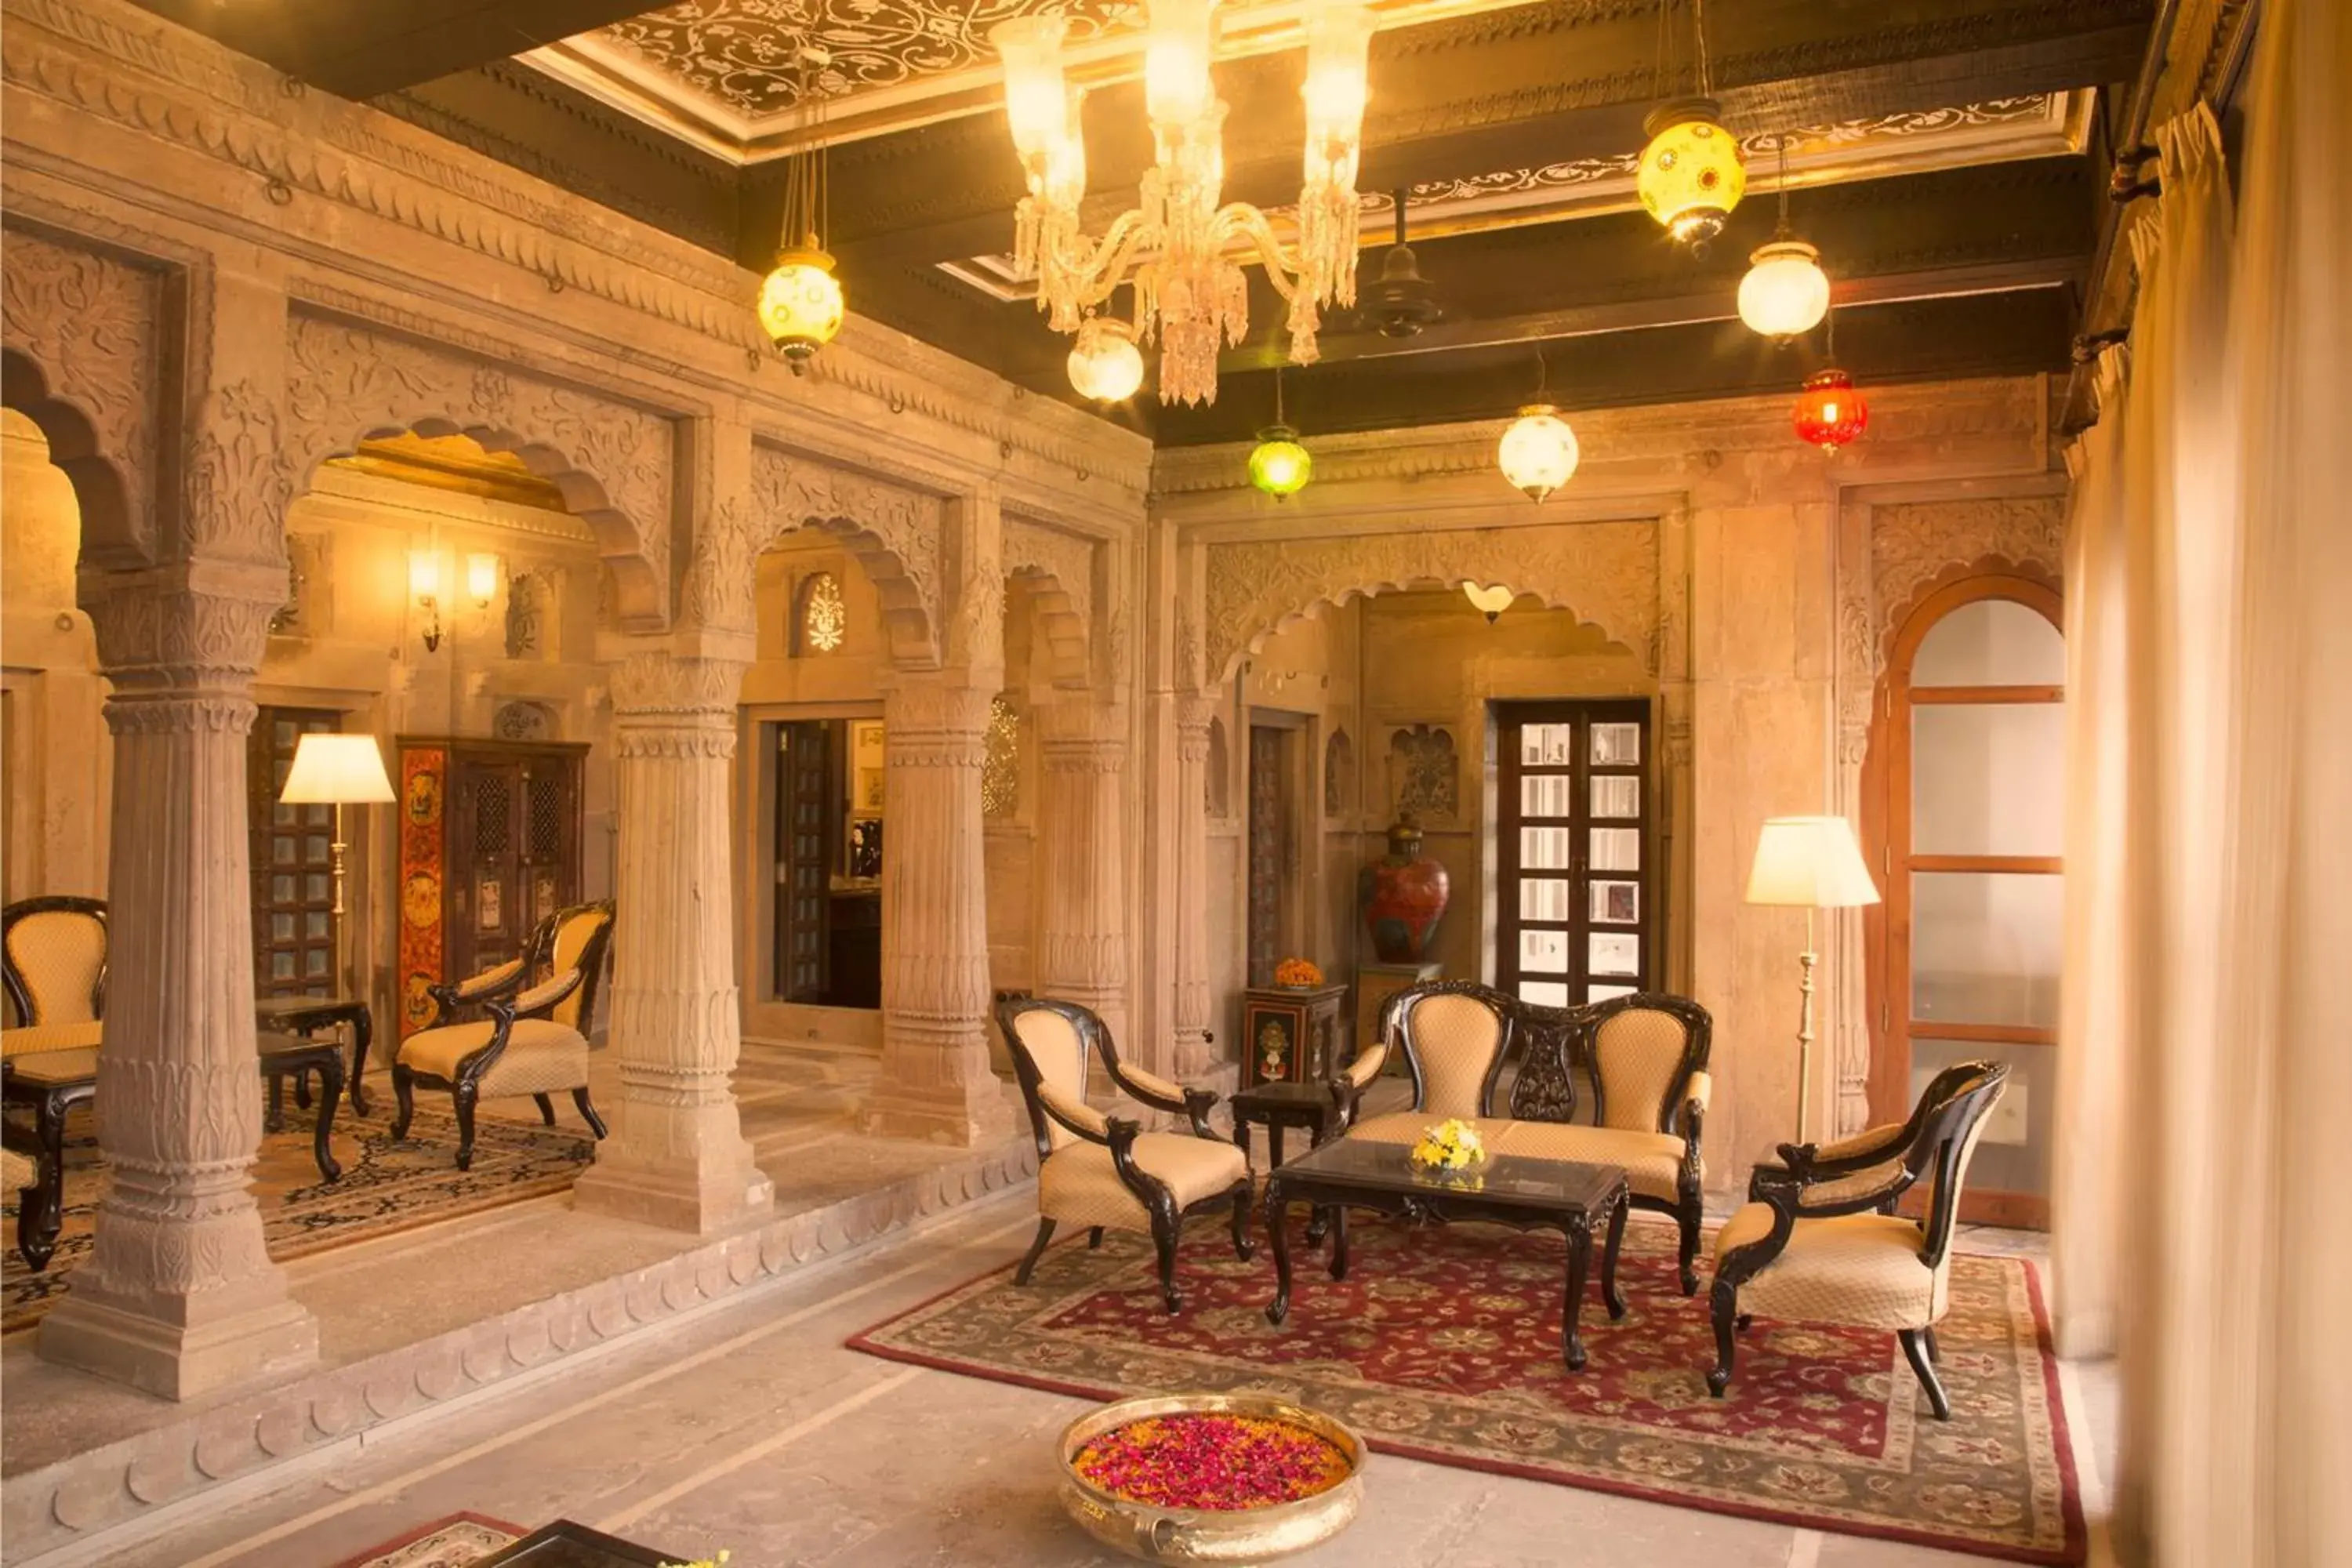 Lobby or reception, Seating Area in BrijRama Palace, Varanasi by the Ganges